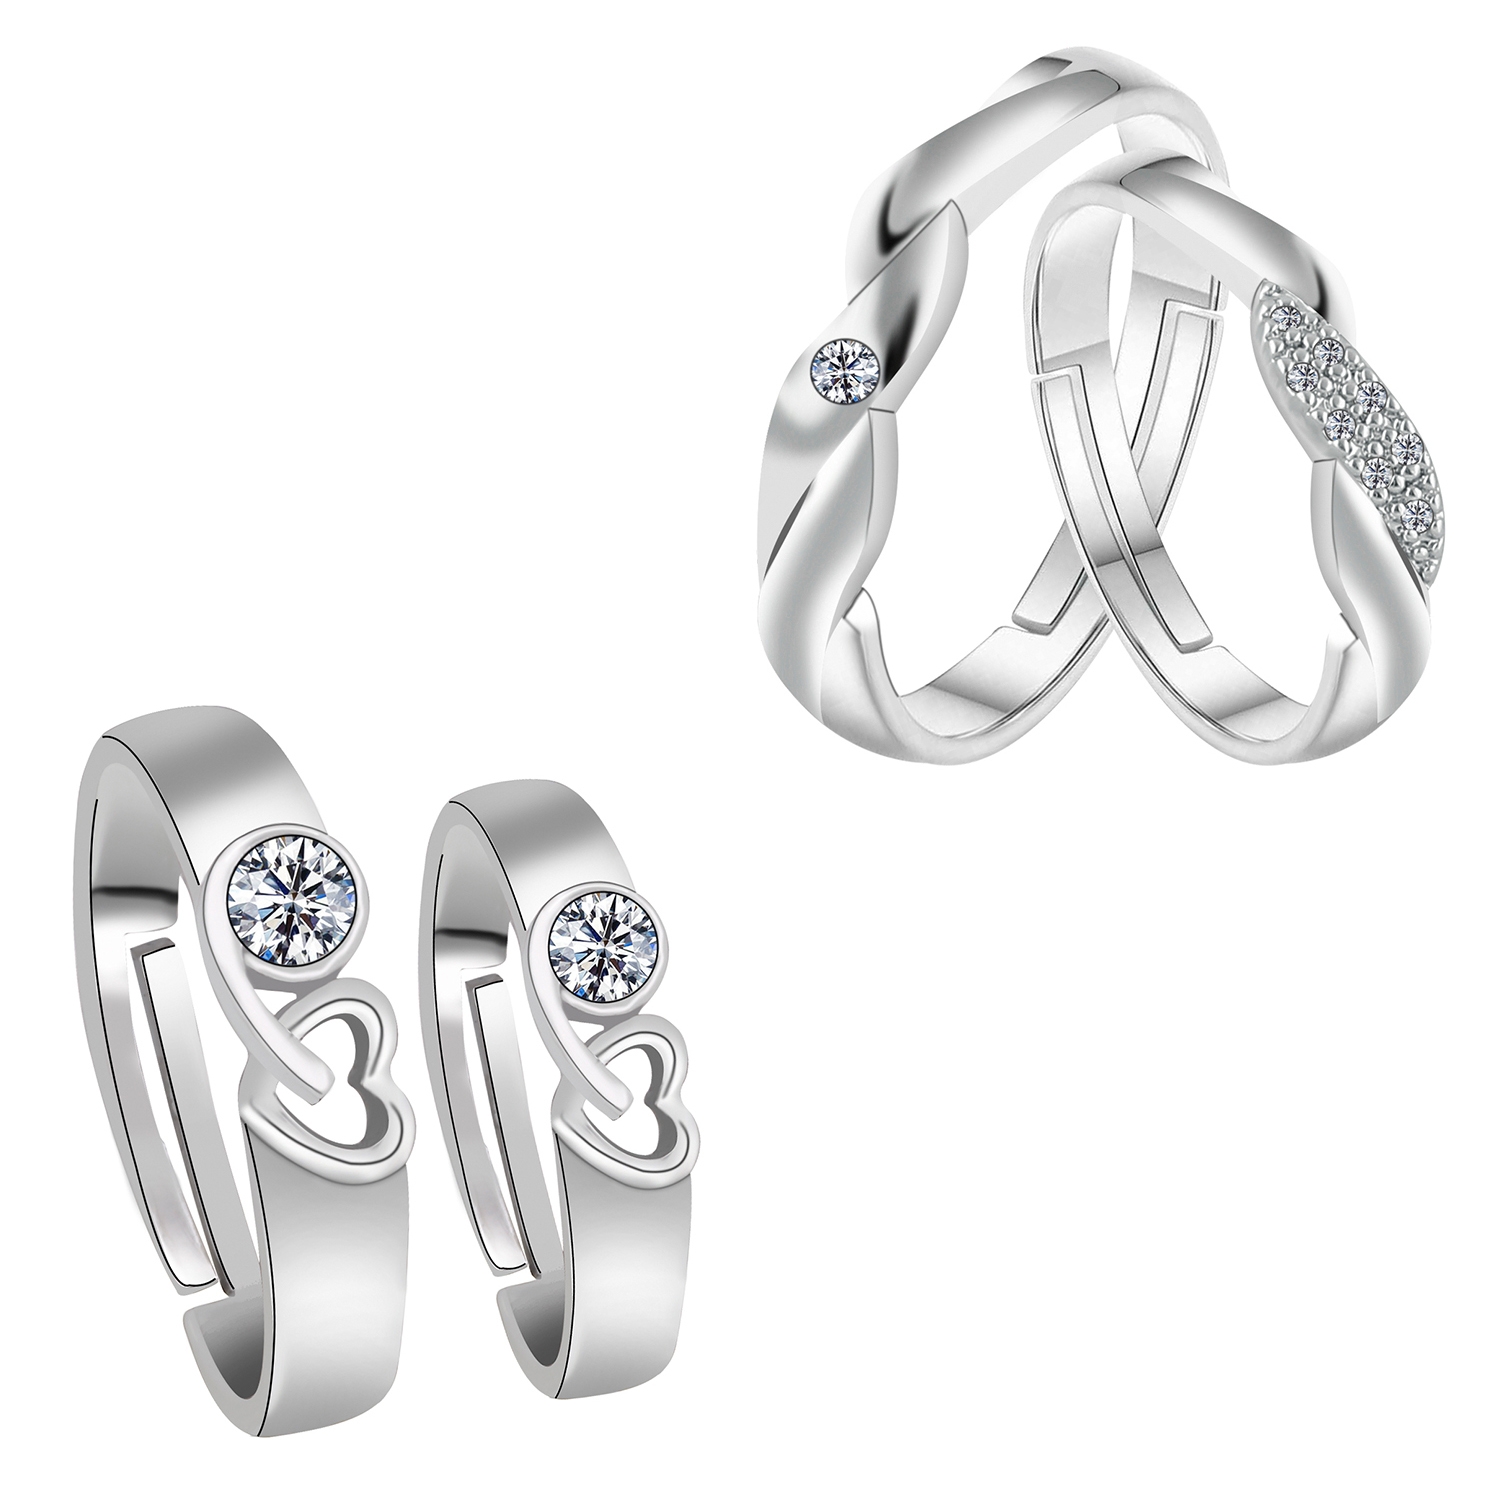 SILVER SHINE |  Adjustable Couple Rings Set for lovers Silver Plated Designer Solitaire for Men and Women 2 Pair  1